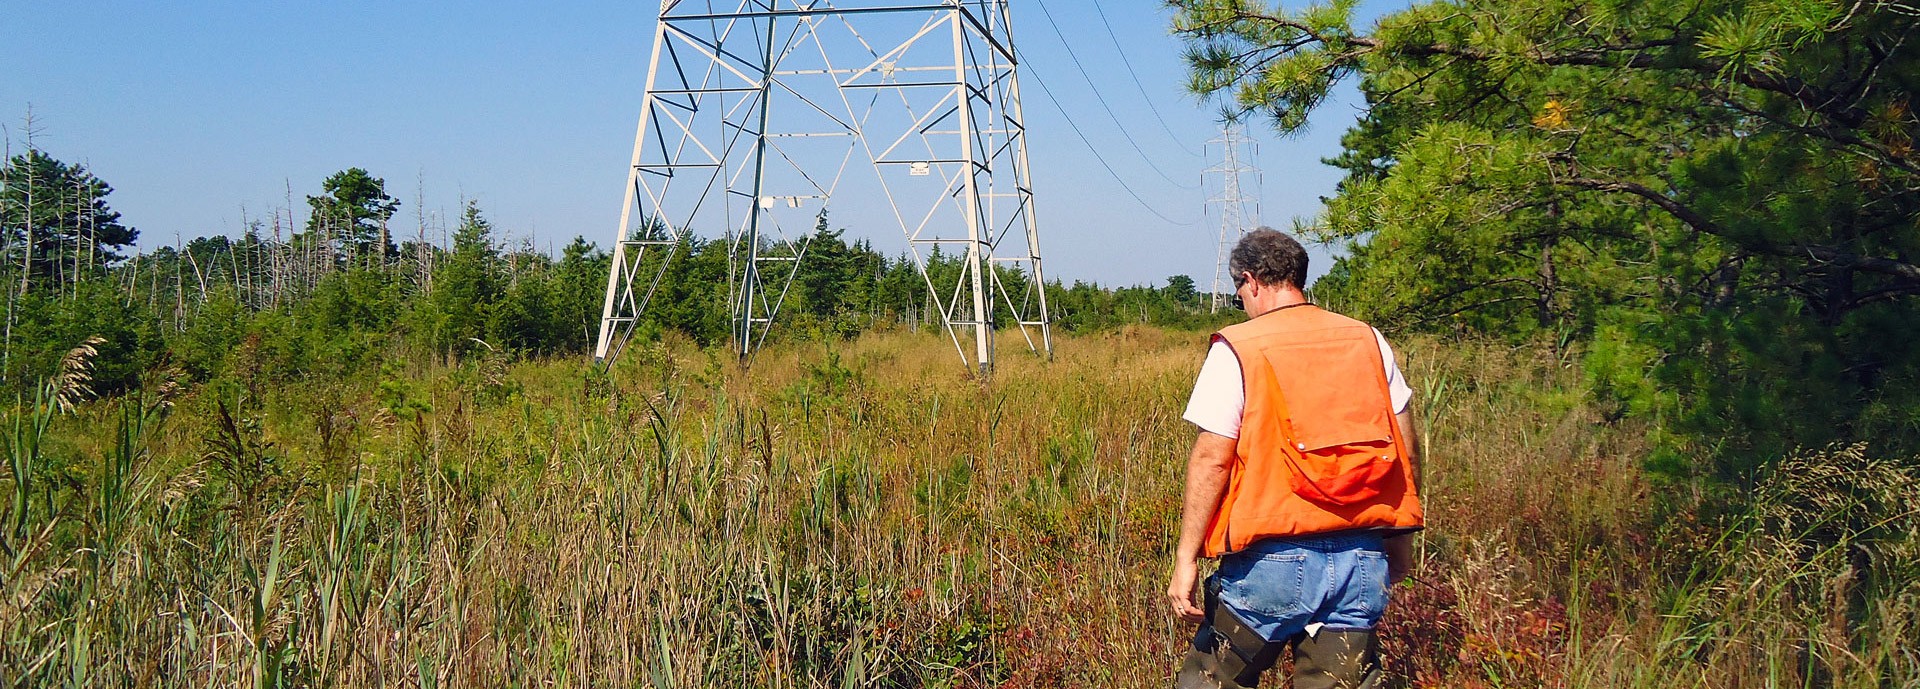 man in orange vest walking in green field with electrical tower in the distance